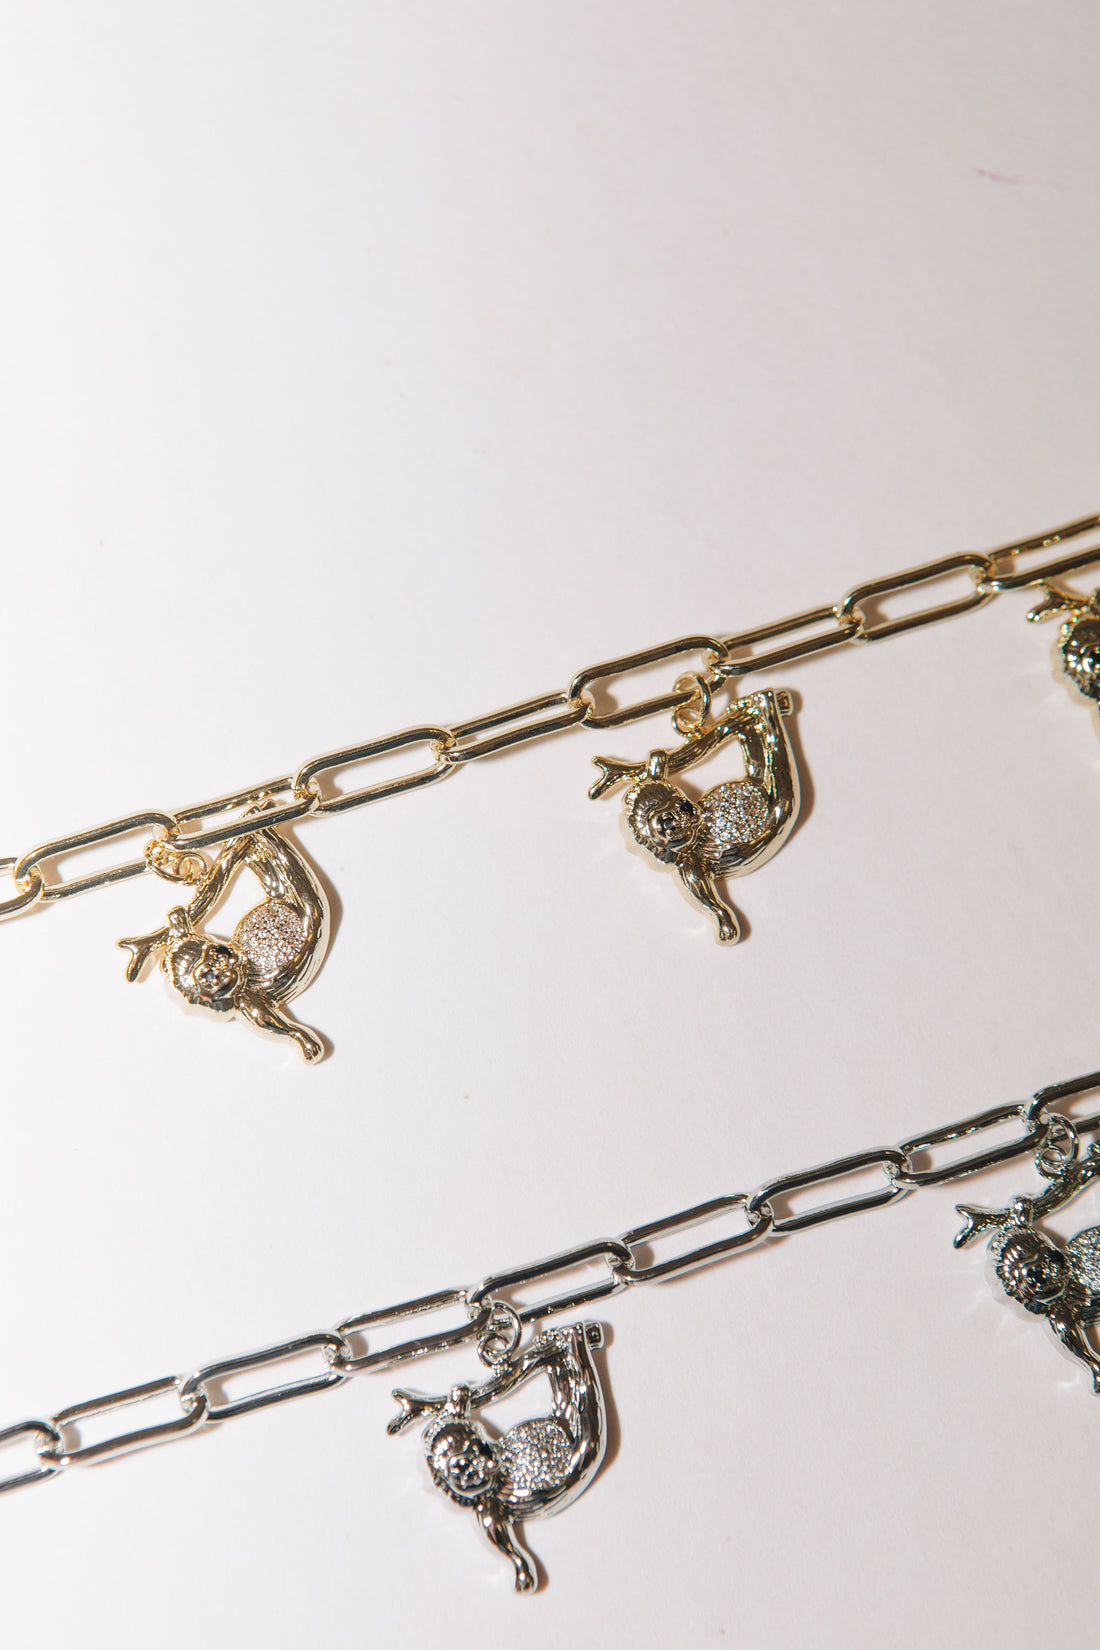 Ivy Exclusive - Schid the Sloth Charm Necklace